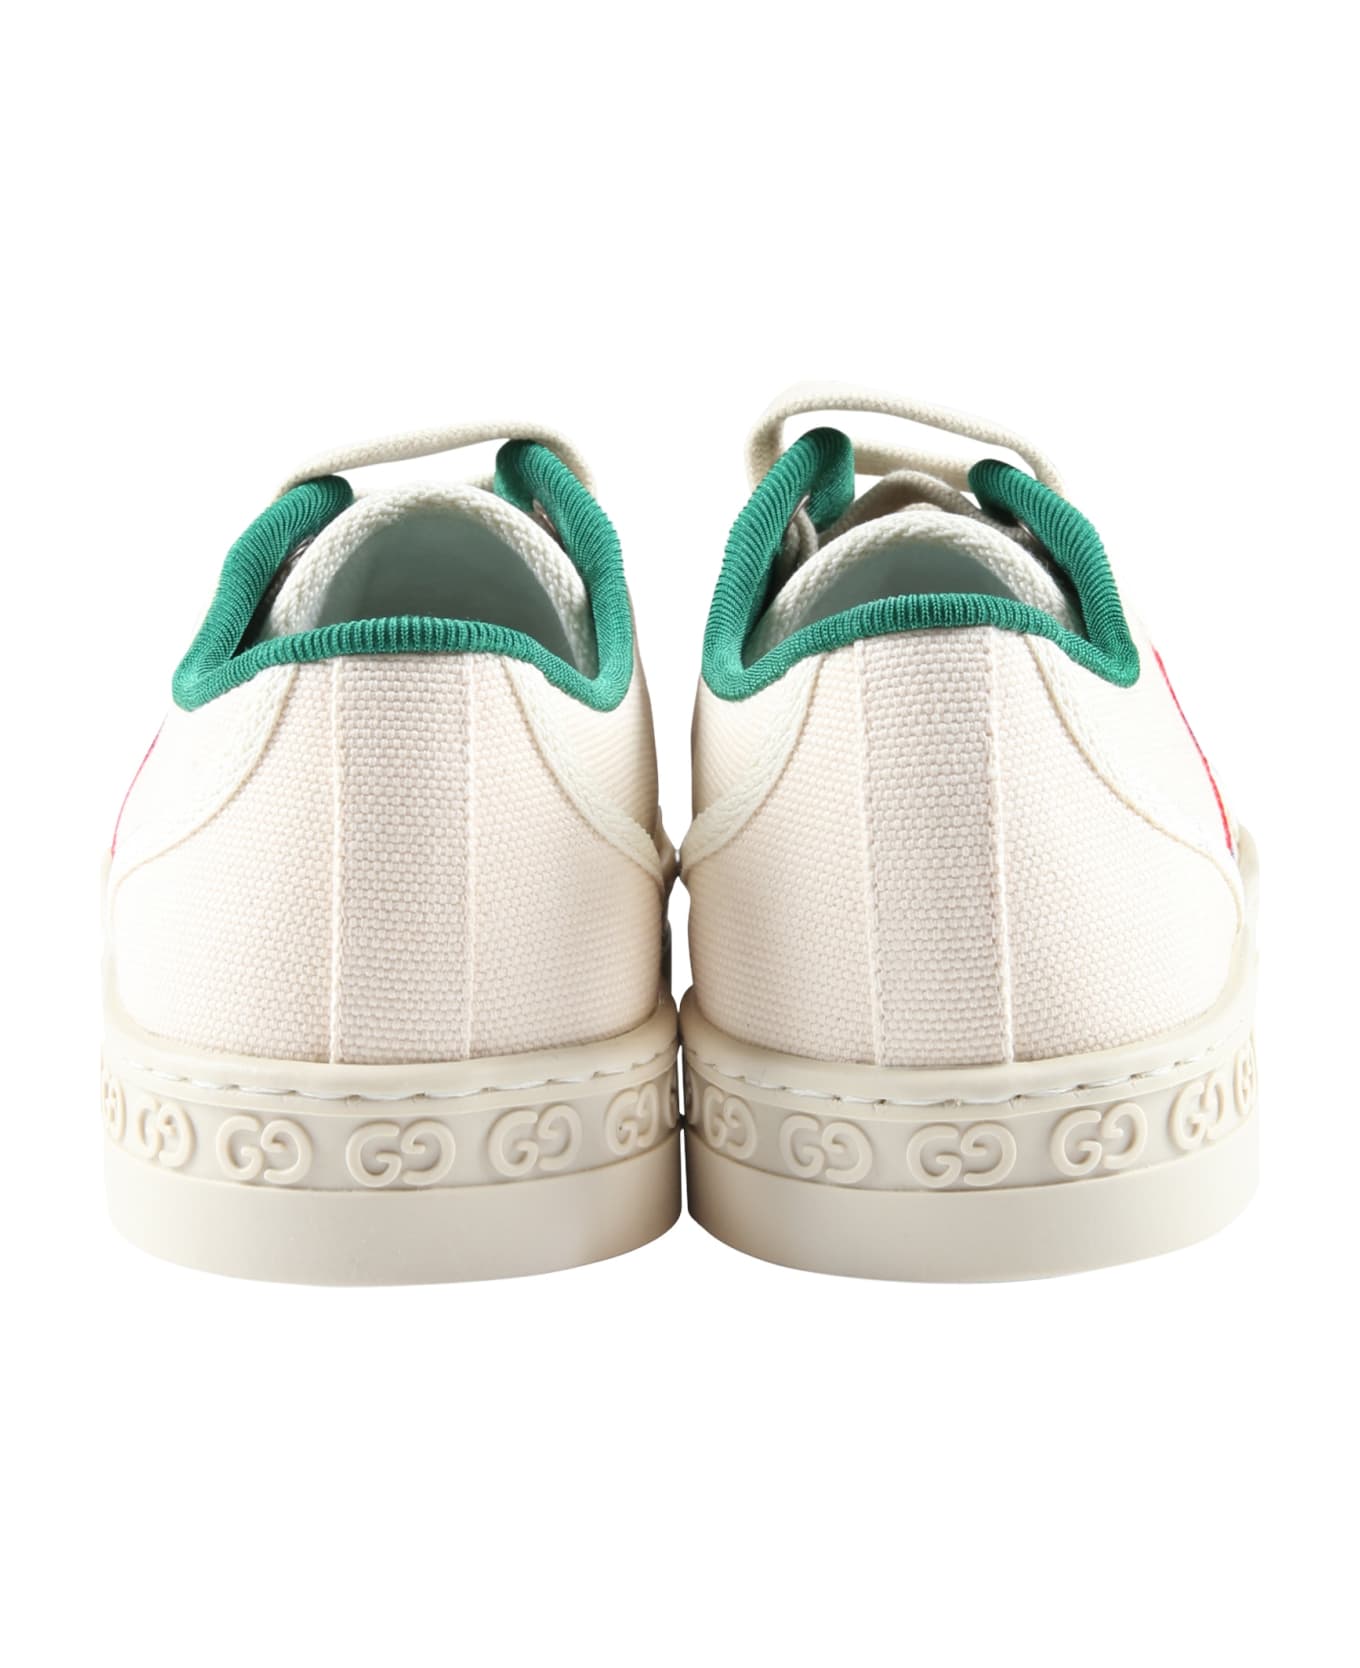 Gucci Ivory Sneakers For Kids Gucci Tennis 1977 - White シューズ